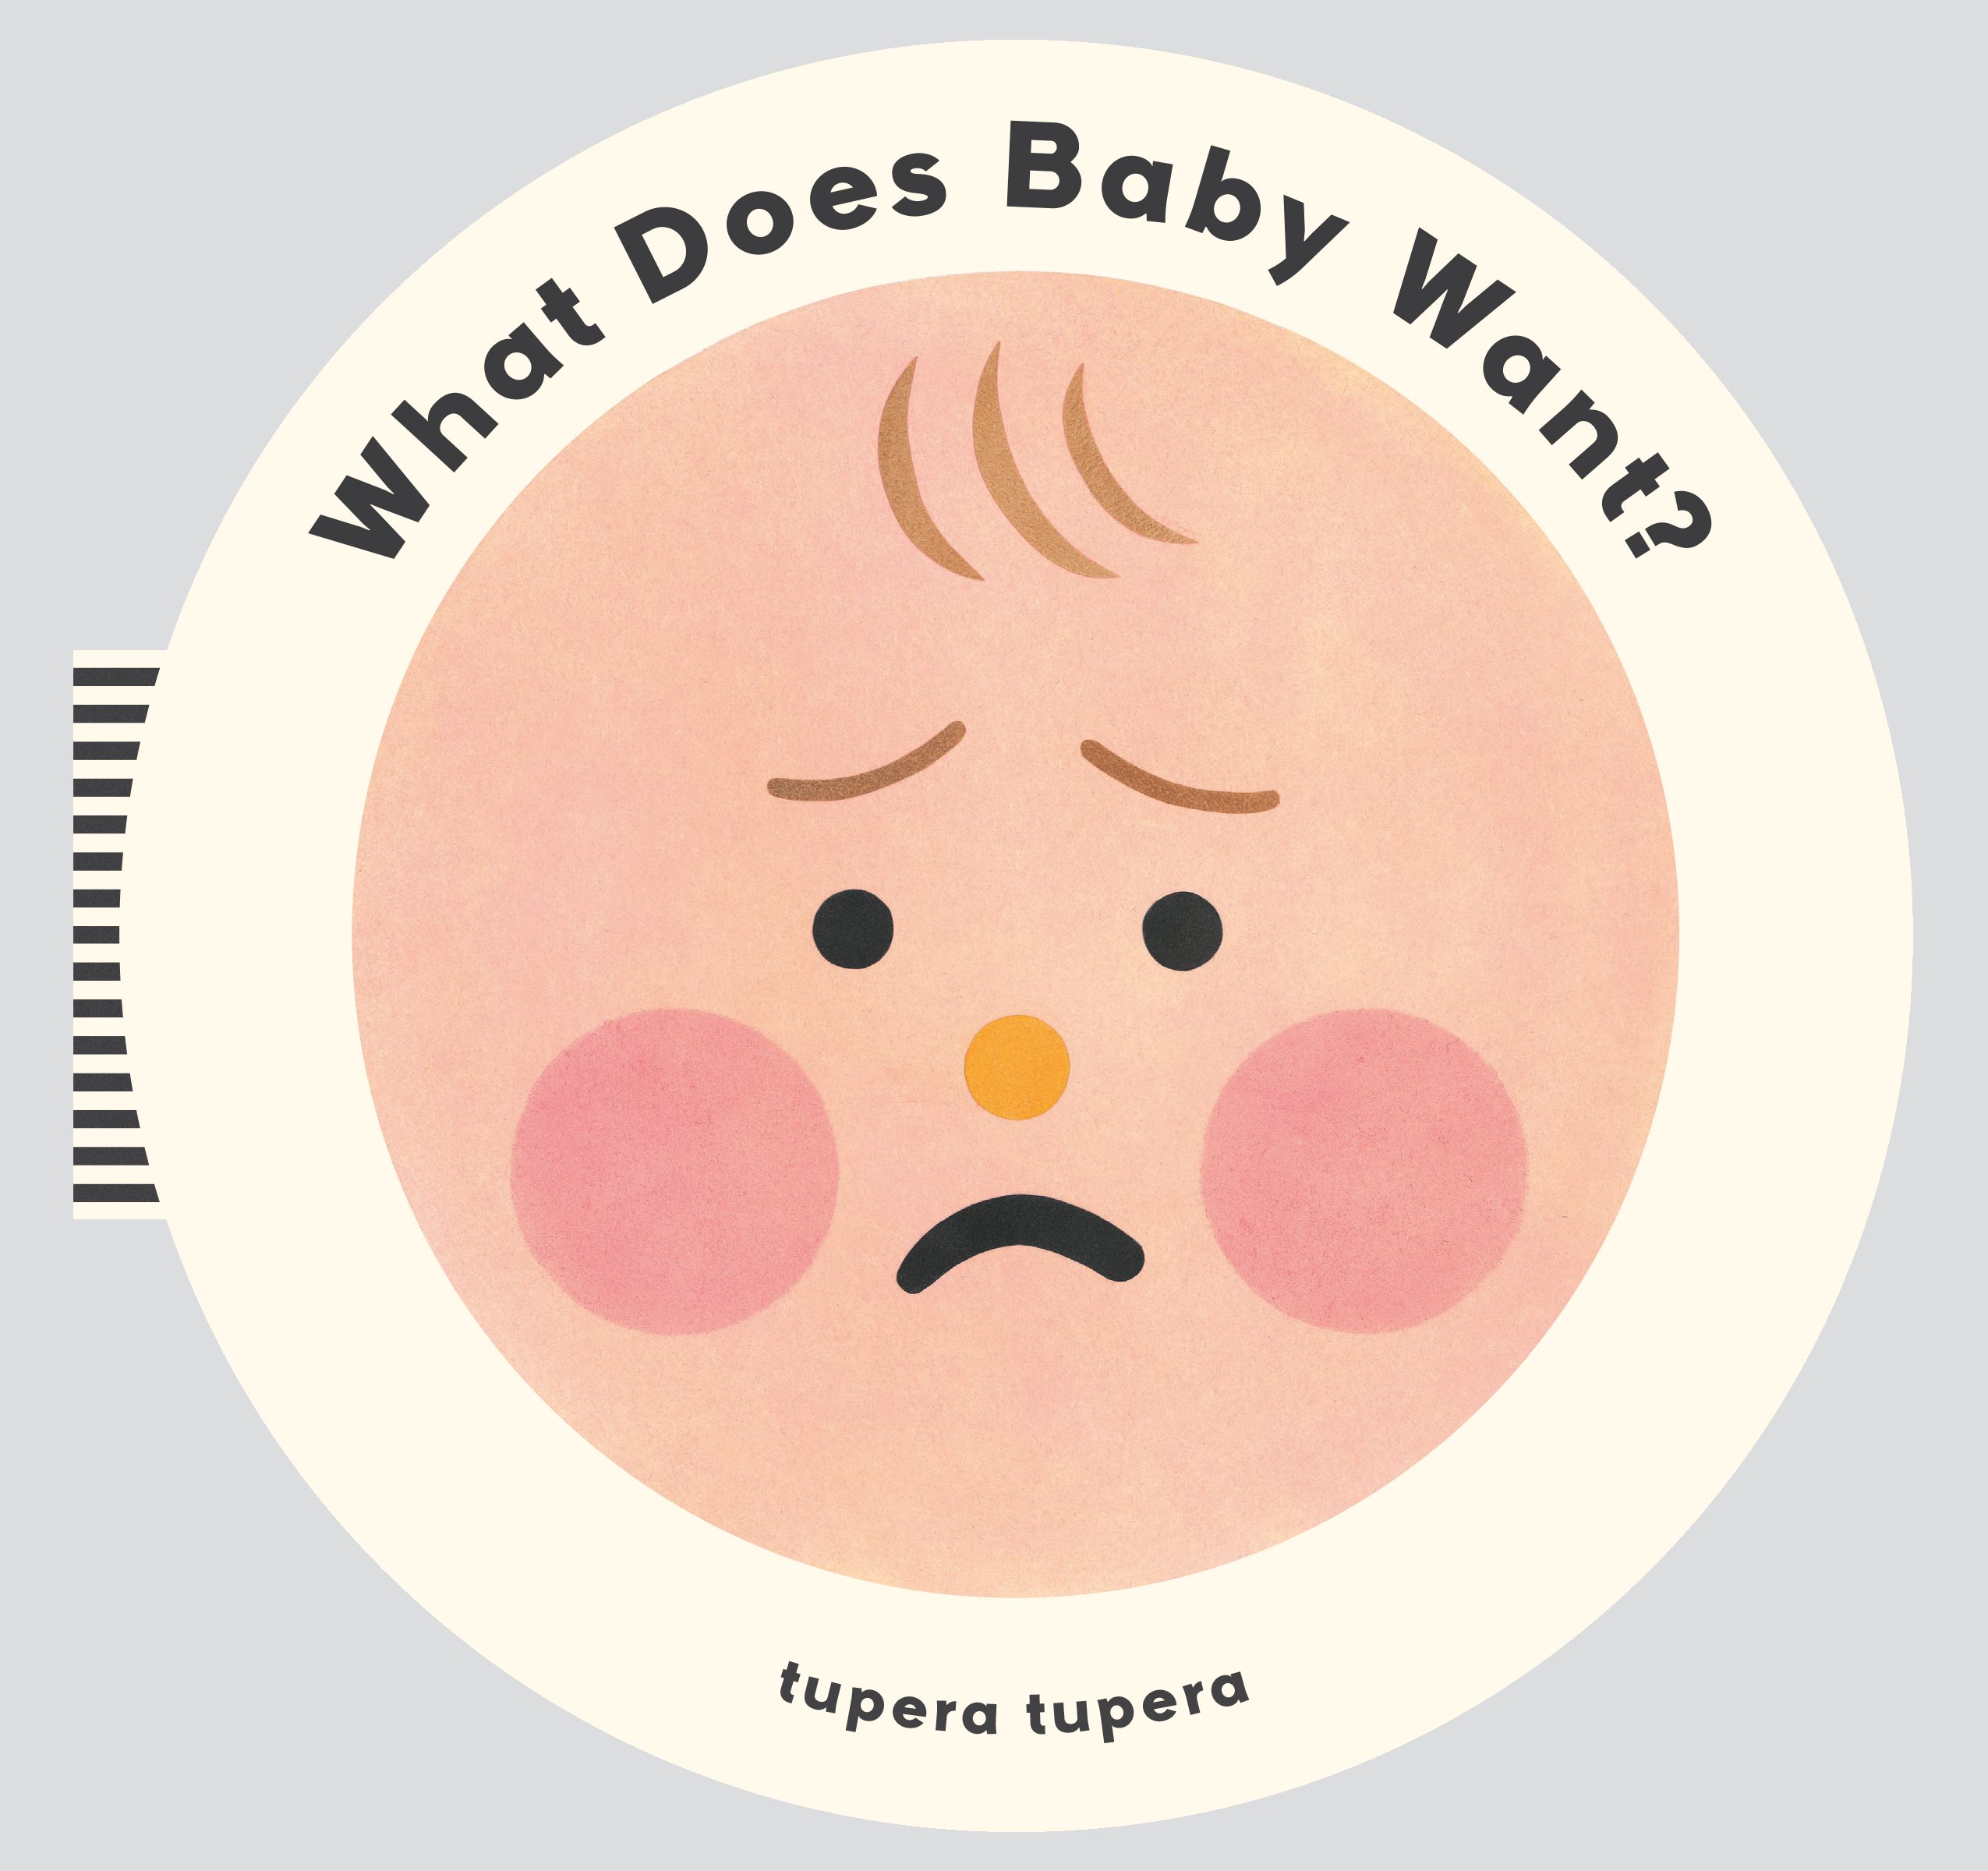 What Does Baby Want? | Tupera Tupera